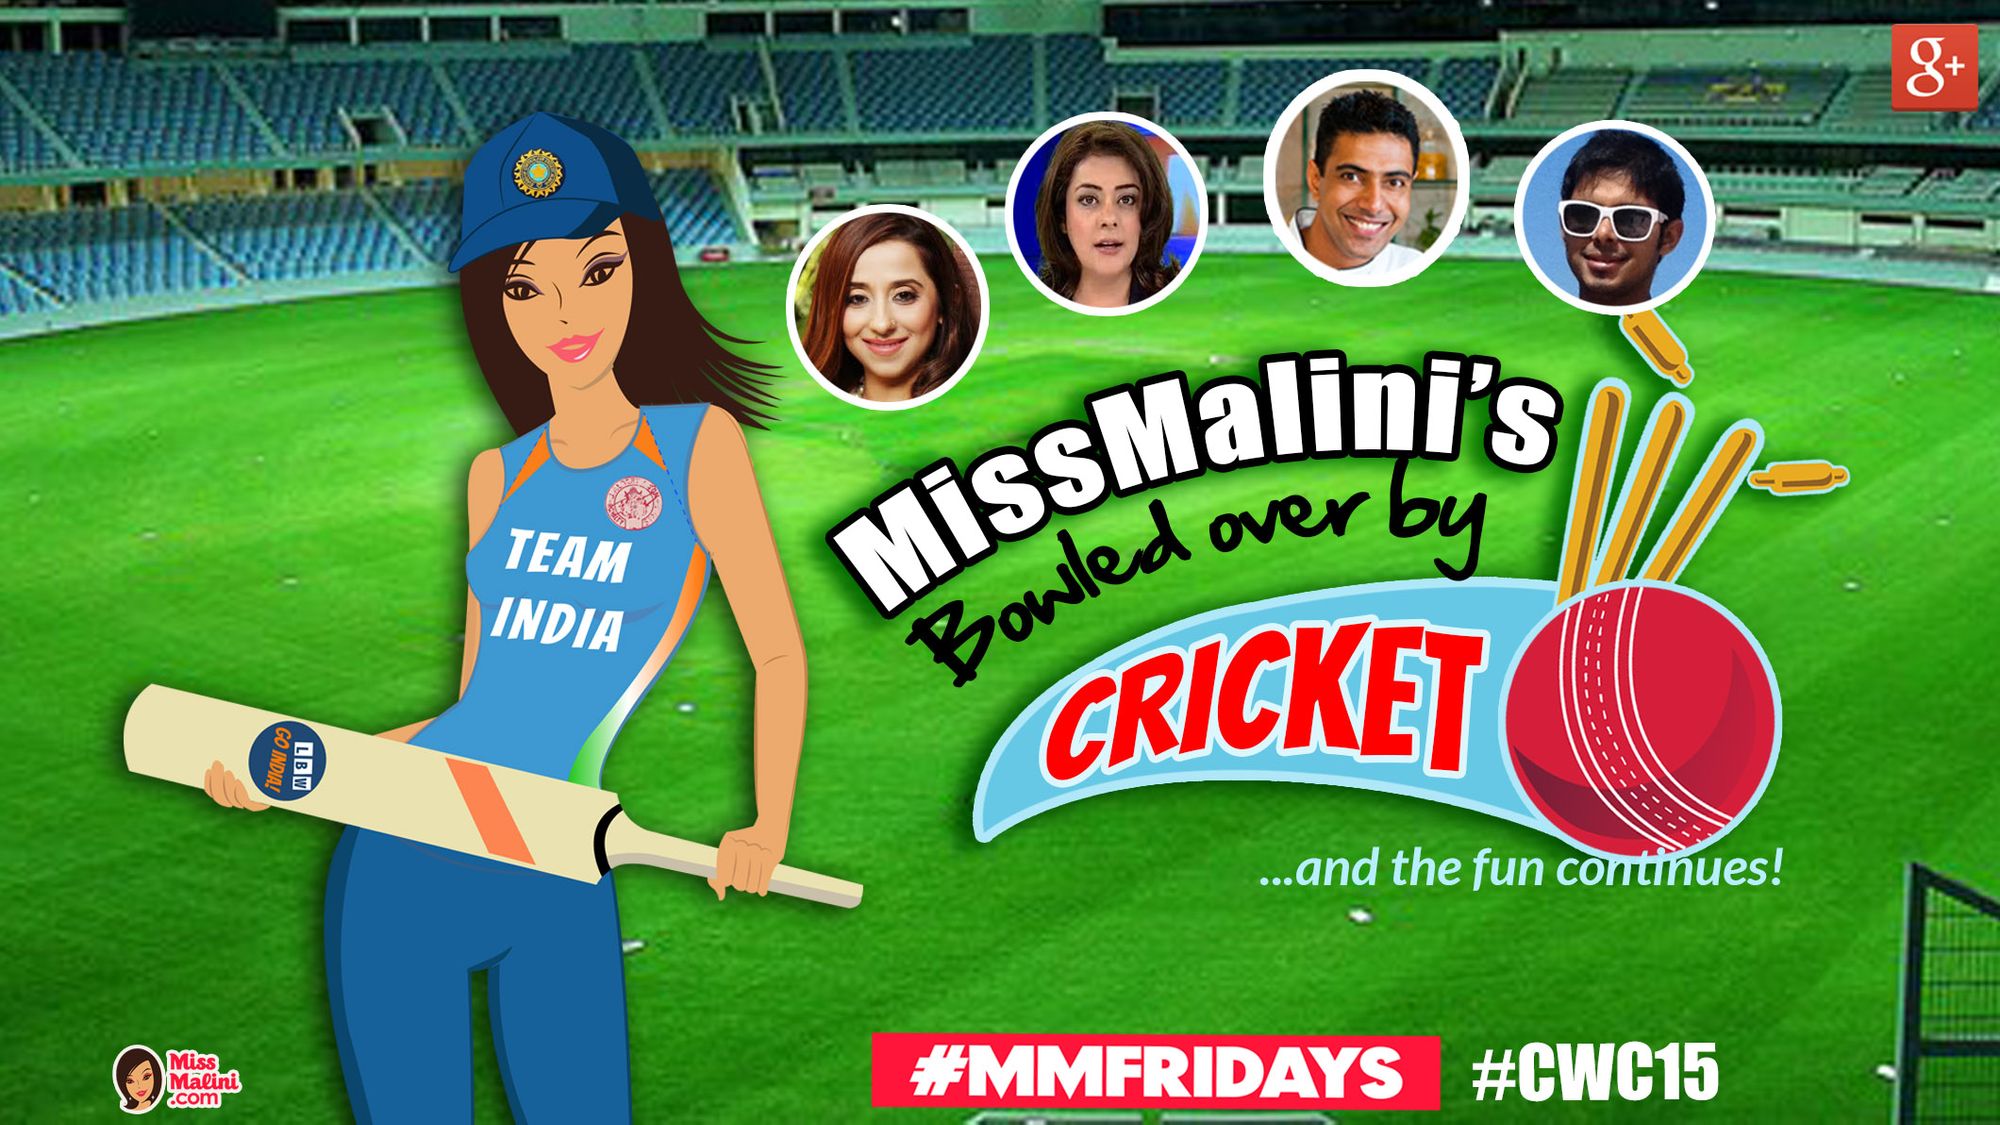 MissMalini's bowled over by cricket